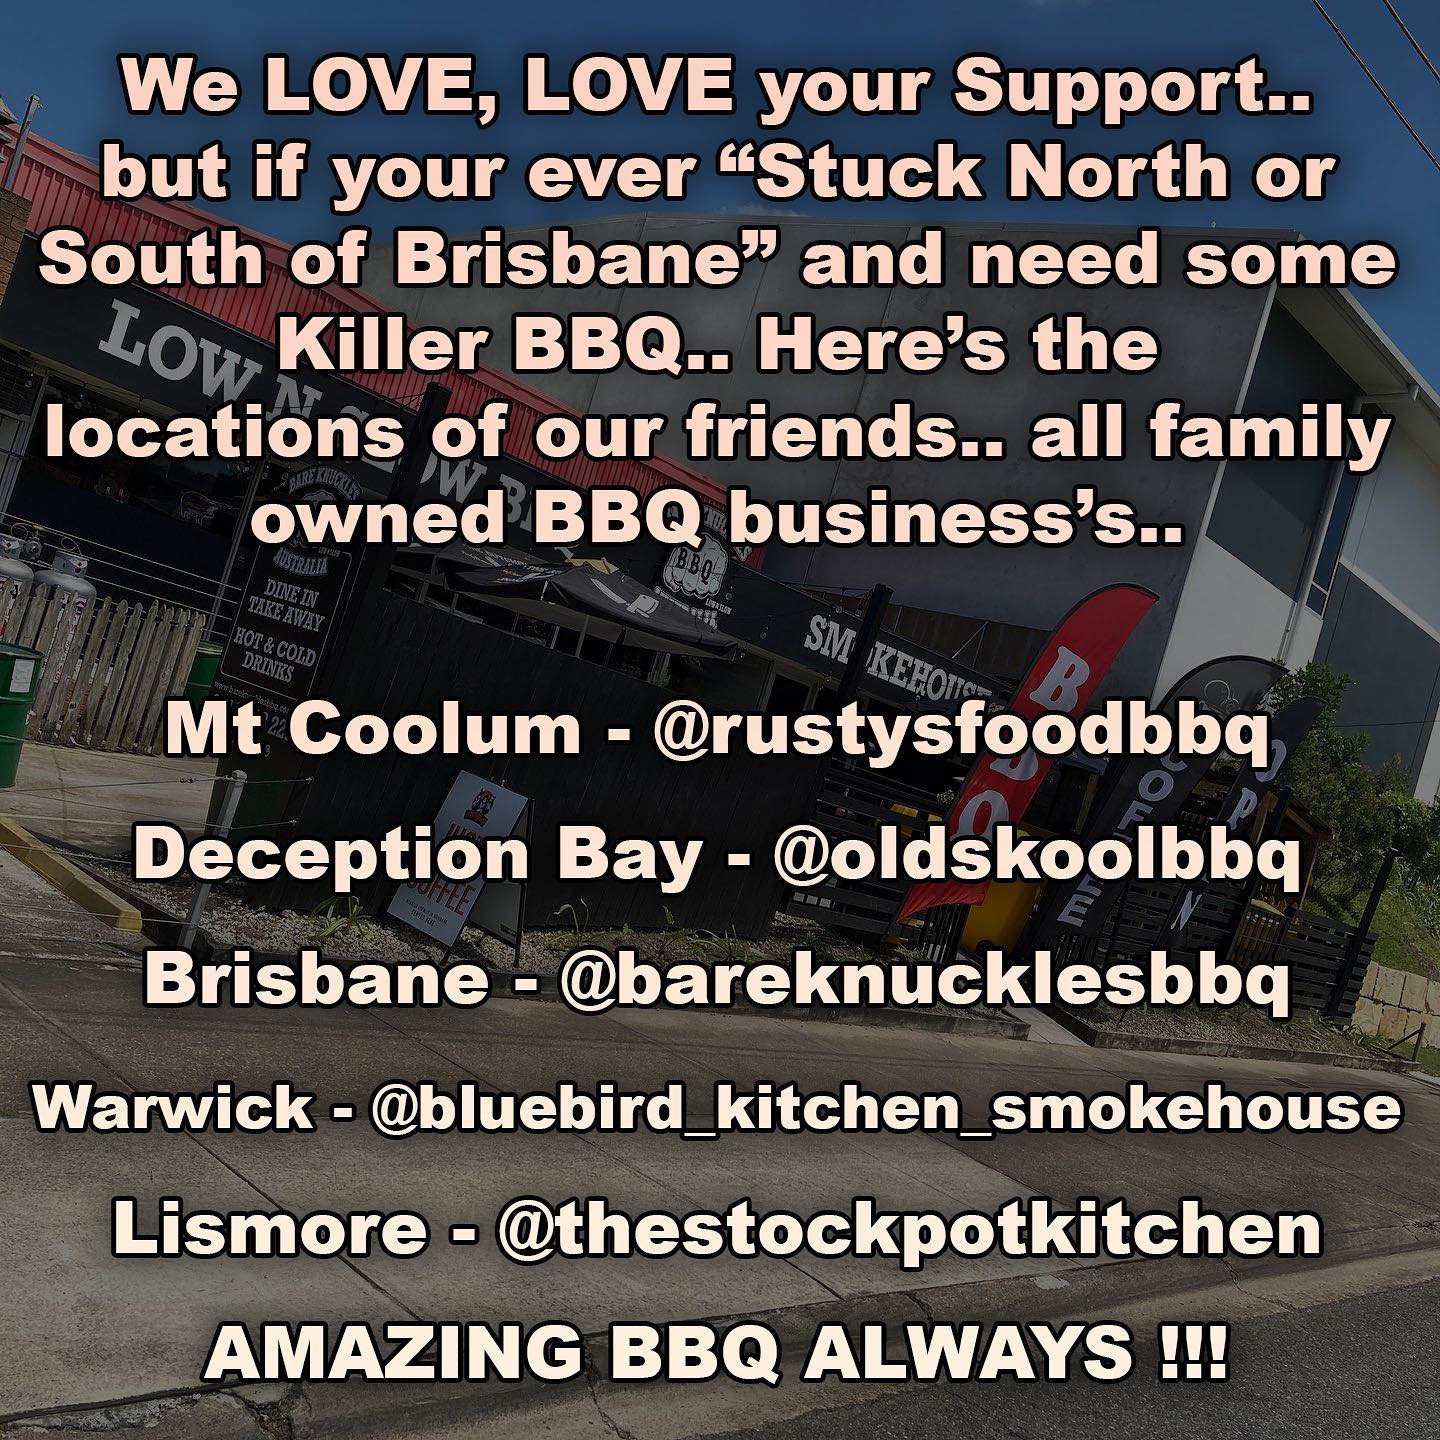 “We Love your Support - ALWAYS !!!”.. but also want to share the love for our awesome friends.. especially if your stuck North or South of the city and can’t get to us !? Much love to @rustysfoodbbq @oldskoolbbq @bluebird_kitchen_smokehouse @thestockpotkitchen